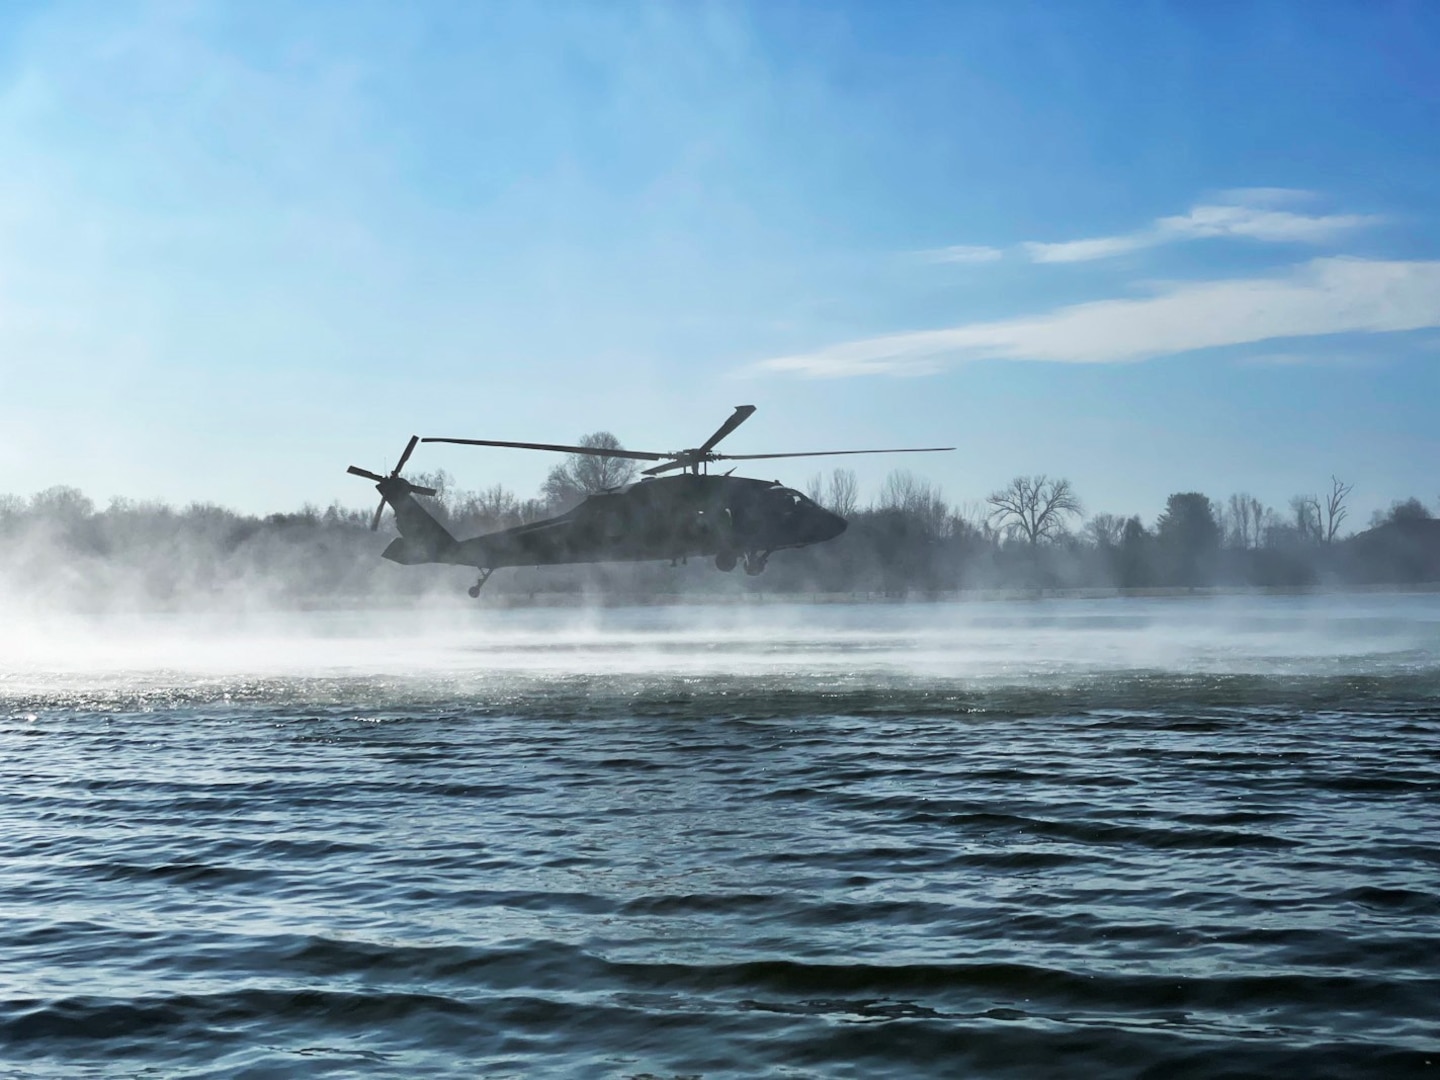 The Tennessee National Guard’s 1-230th Assault Helicopter Battalion and the Nashville Fire Department held a joint exercise to practice hoist operations between Goodlettsville and Hendersonville Dec. 14, 2021.